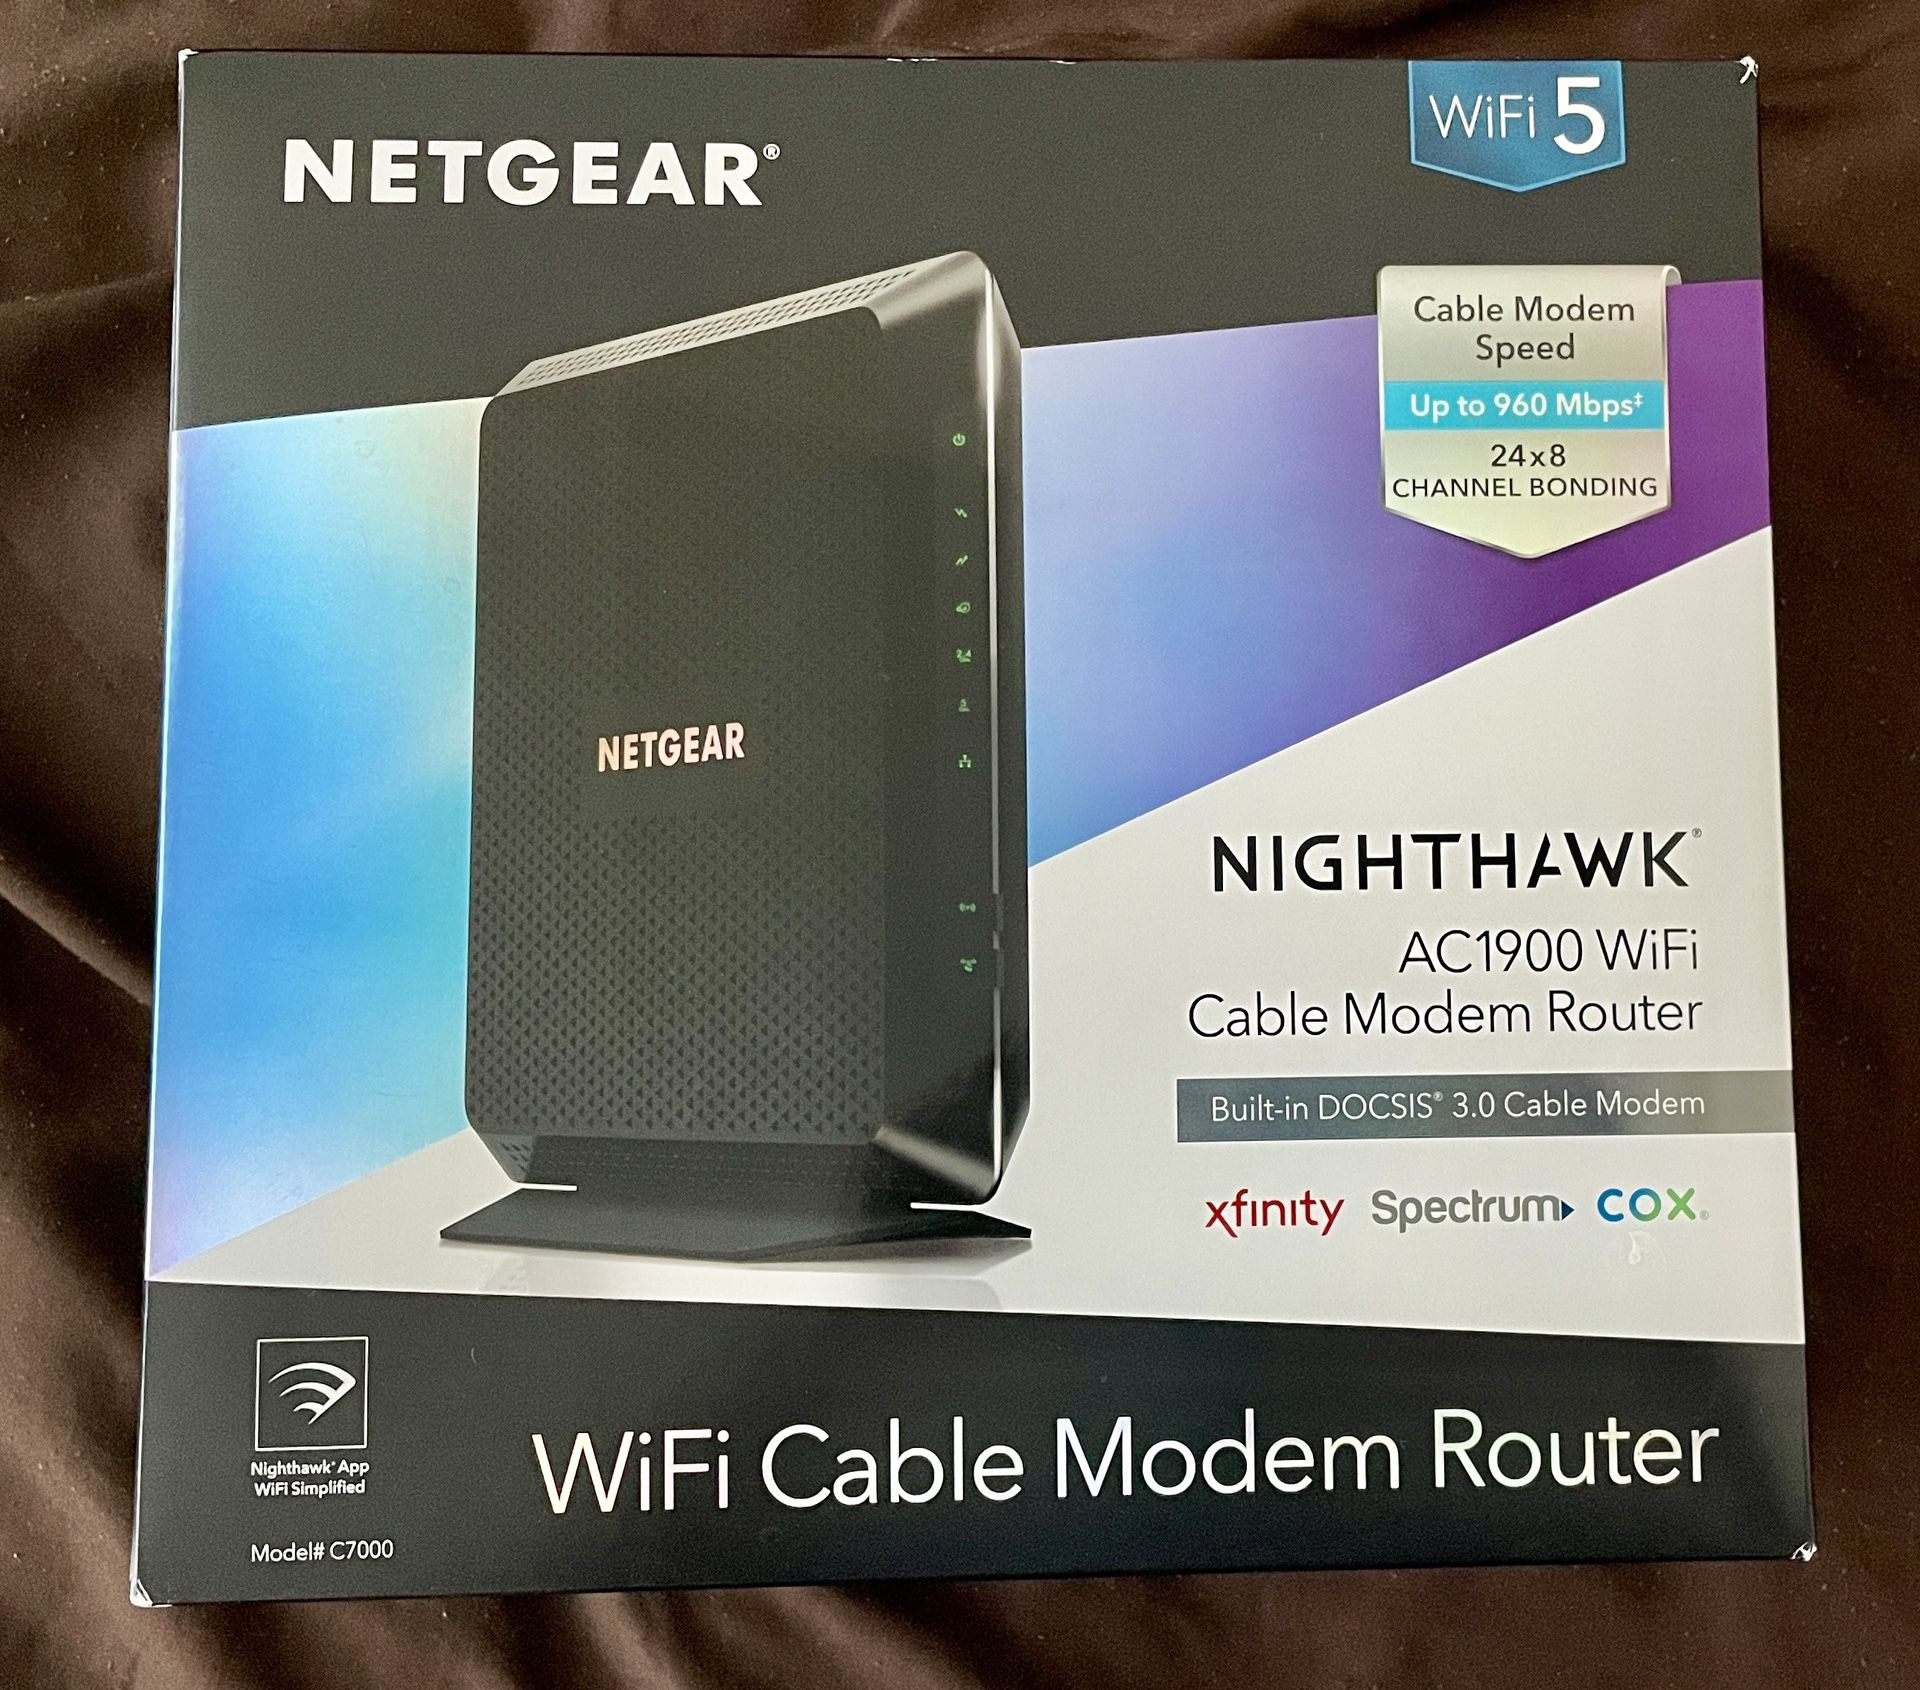 NETGEAR Nighthawk AC1900 (24x8) DOCSIS 3.0 WiFi Cable Modem Router Combo (C7000) for Xfinity from Comcast, Spectrum, Cox, more